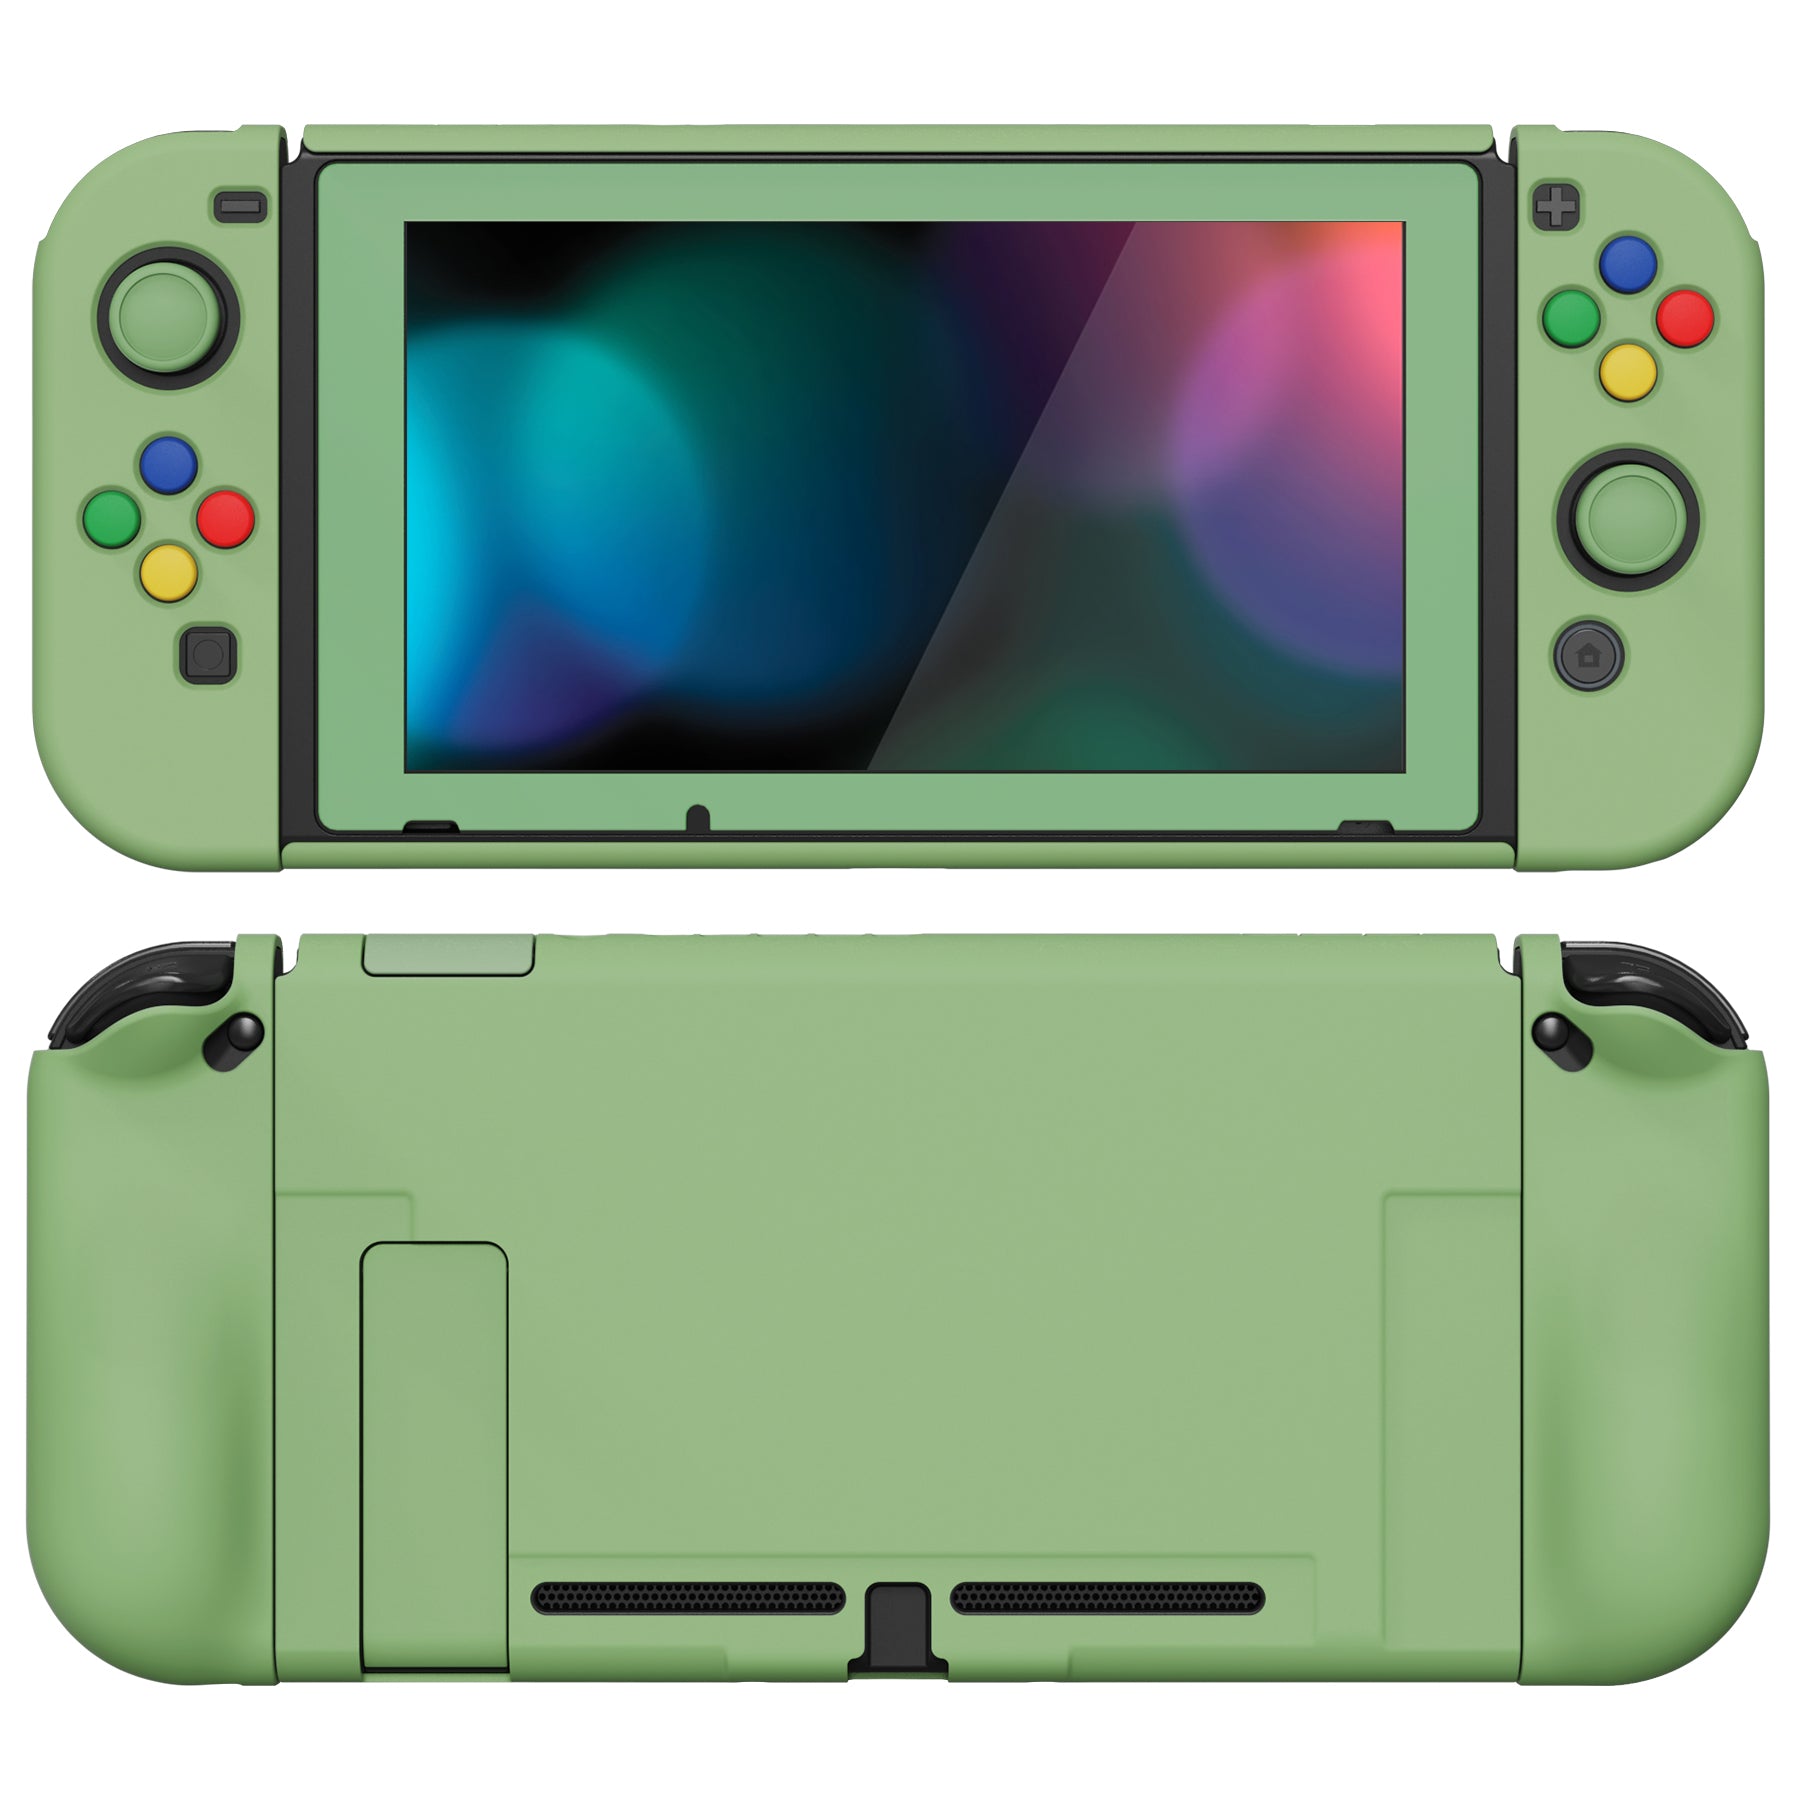 PlayVital AlterGrips Dockable Protective Case Ergonomic Grip Cover for Nintendo Switch, Interchangeable Cover w/Screen Protector & Thumb Grip Caps & Button Caps - Matcha Green - TNSYP3005